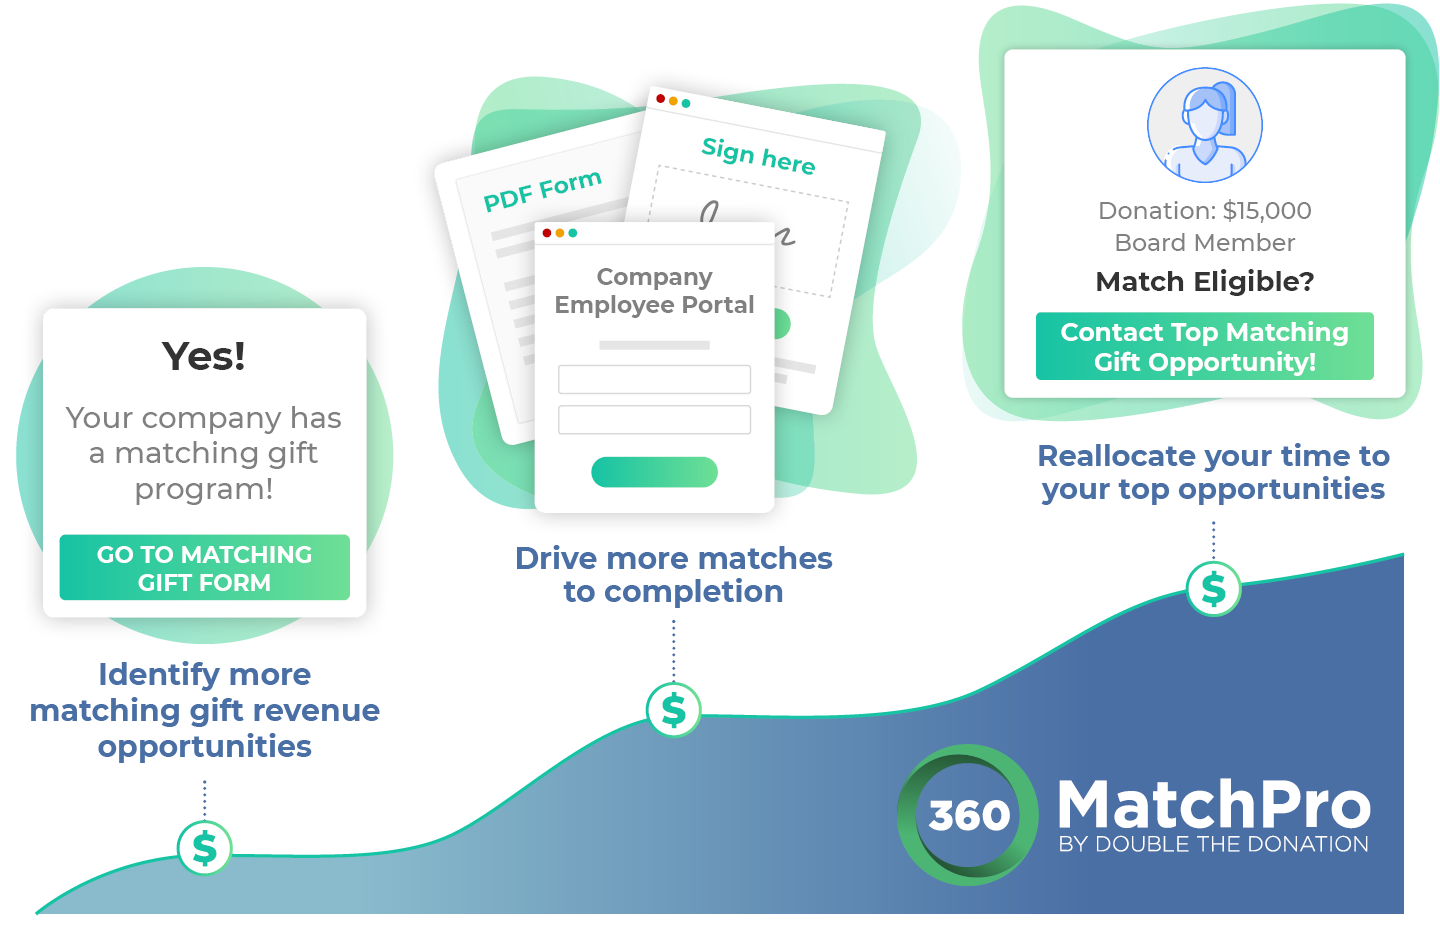 360MatchPro provides value to your nonprofit with corporate gift matching marketing!